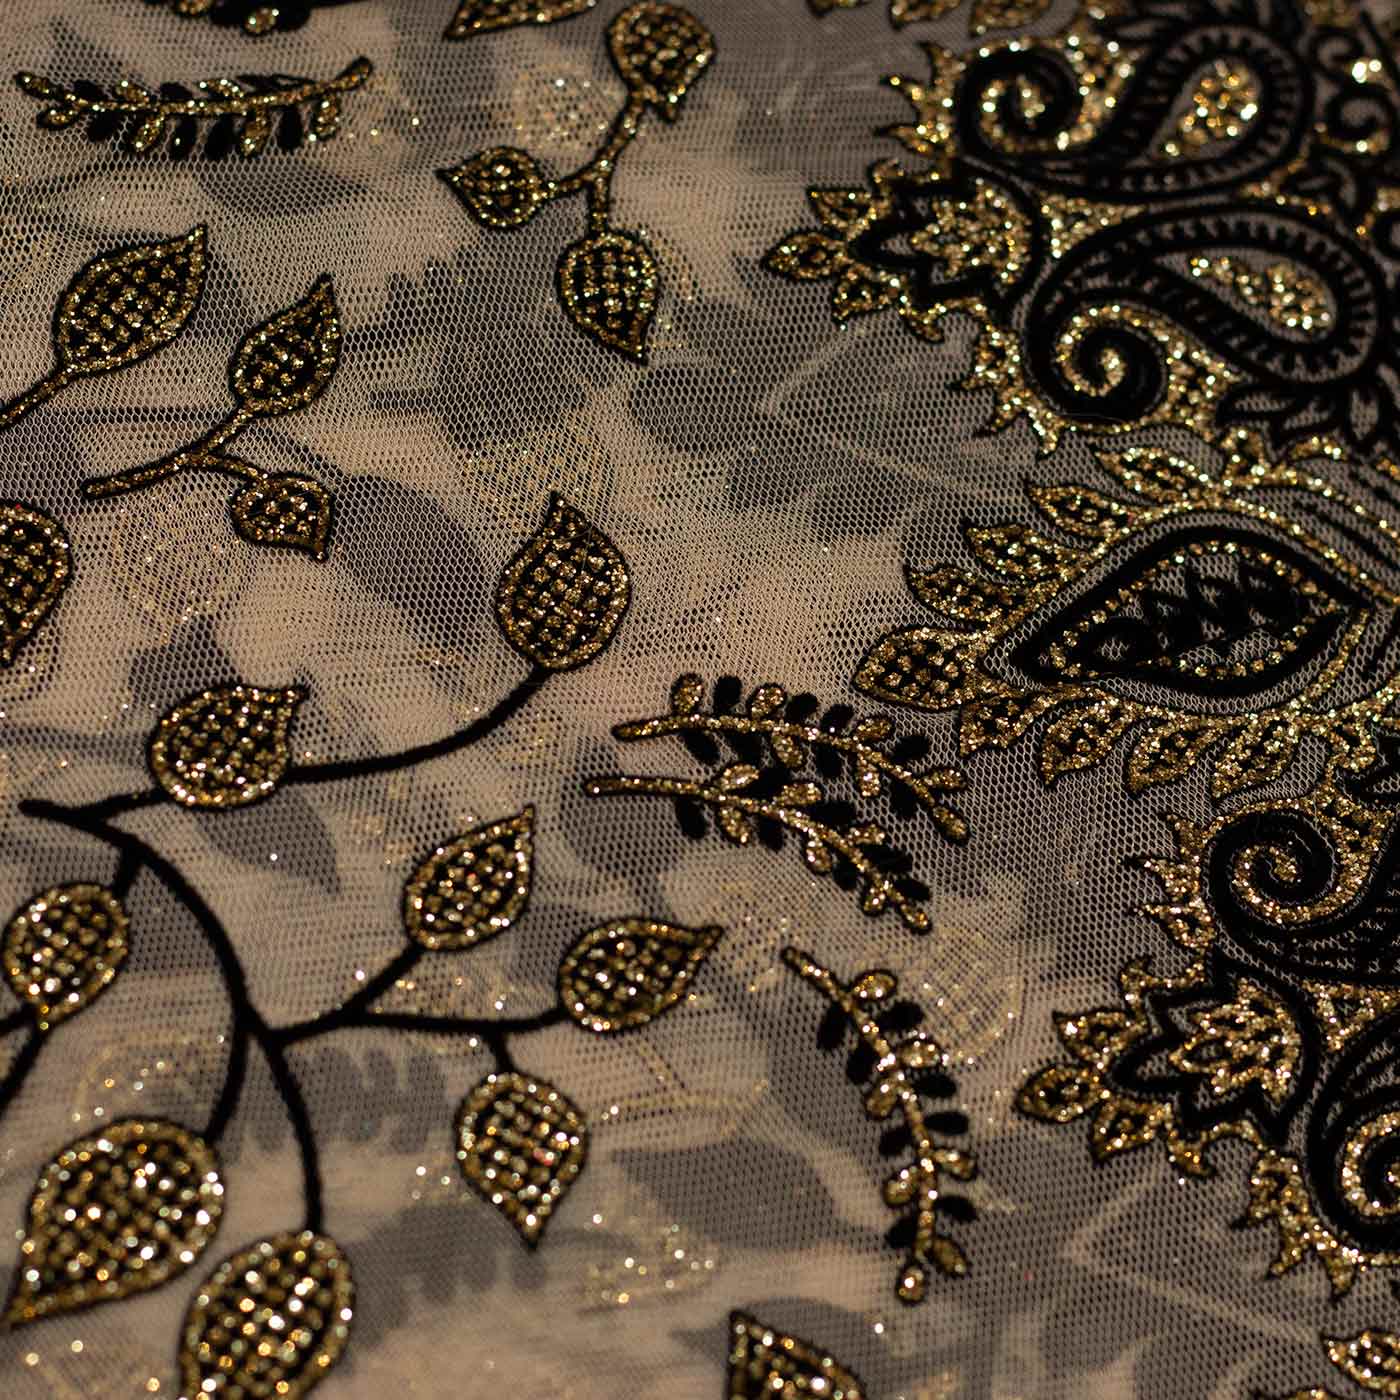 Gold and Black Floral Metallic Mesh Fabric